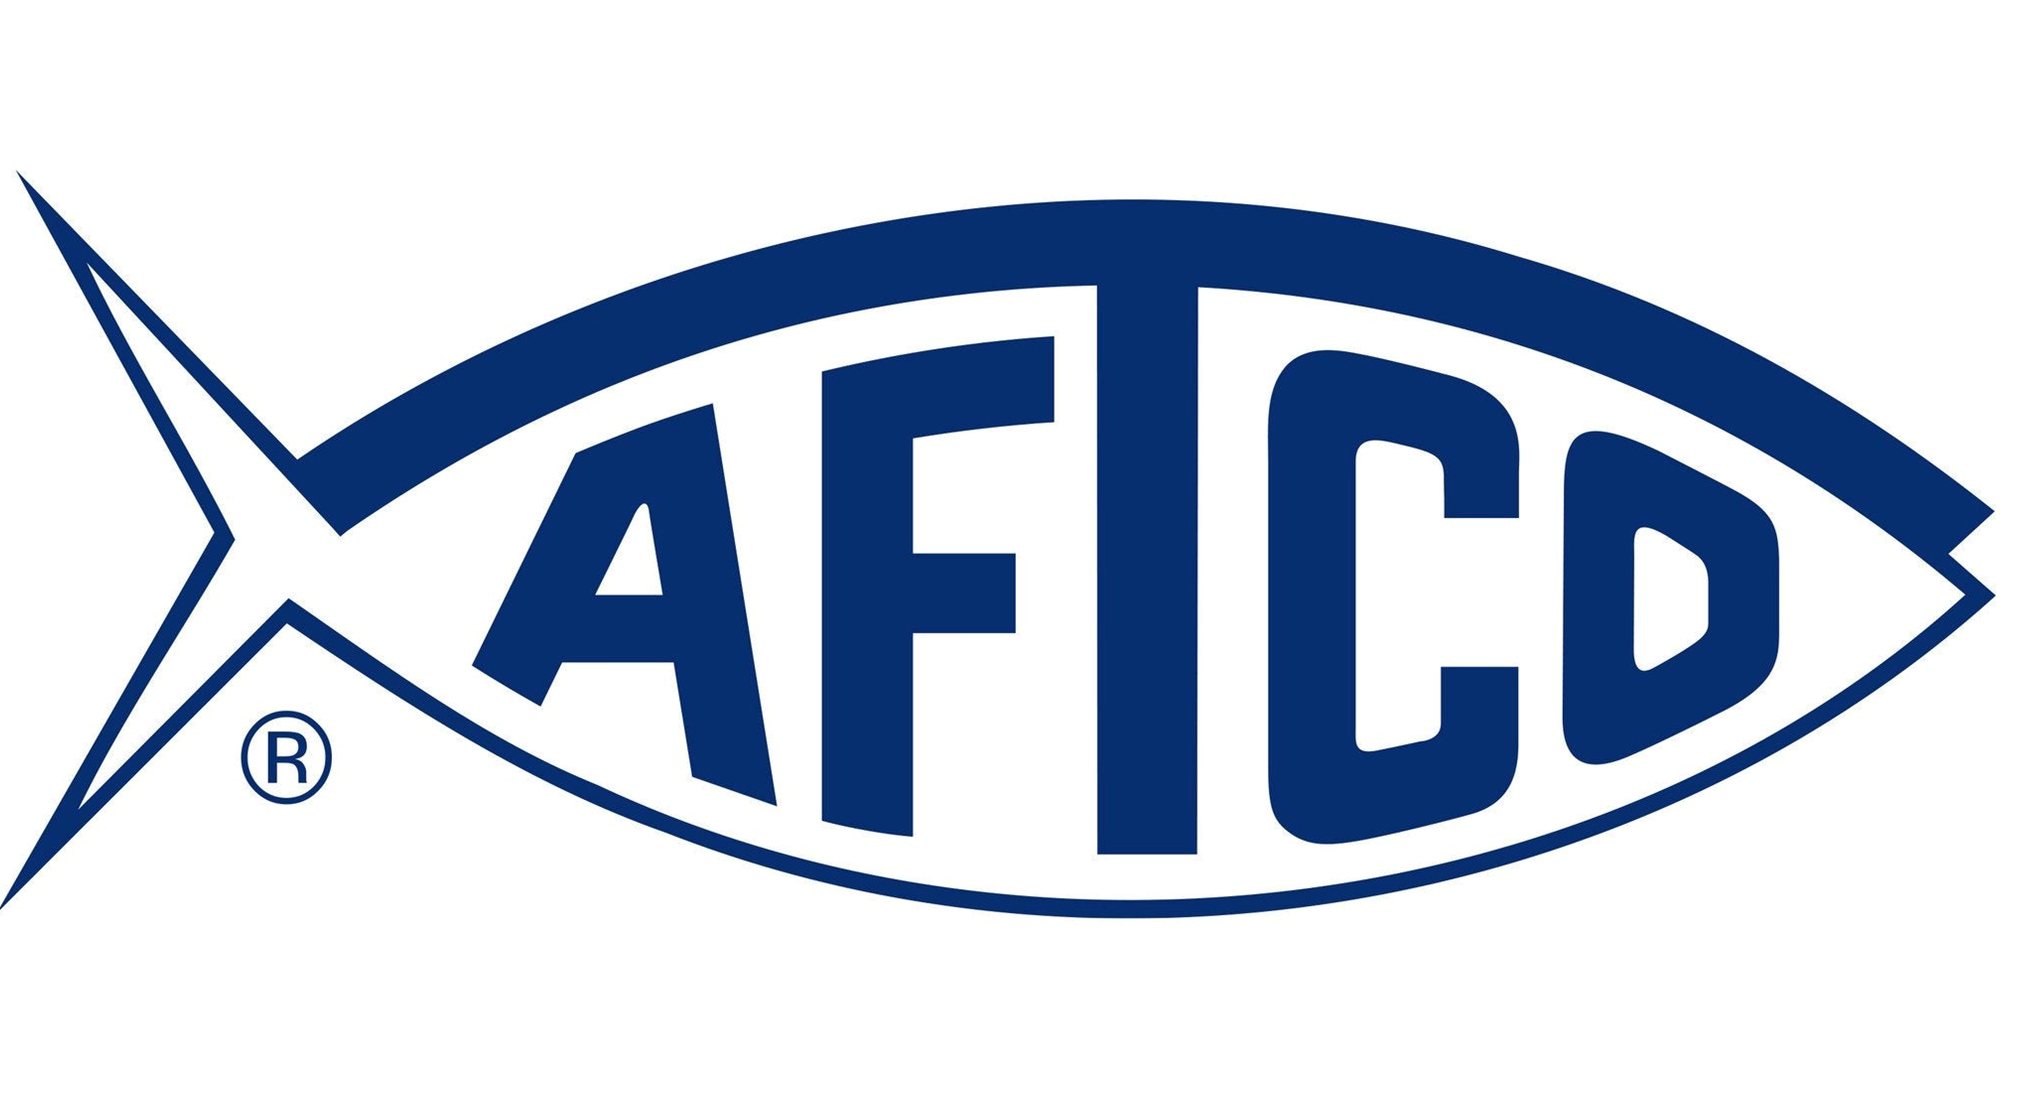 aftco-logo-blue-and-white.png